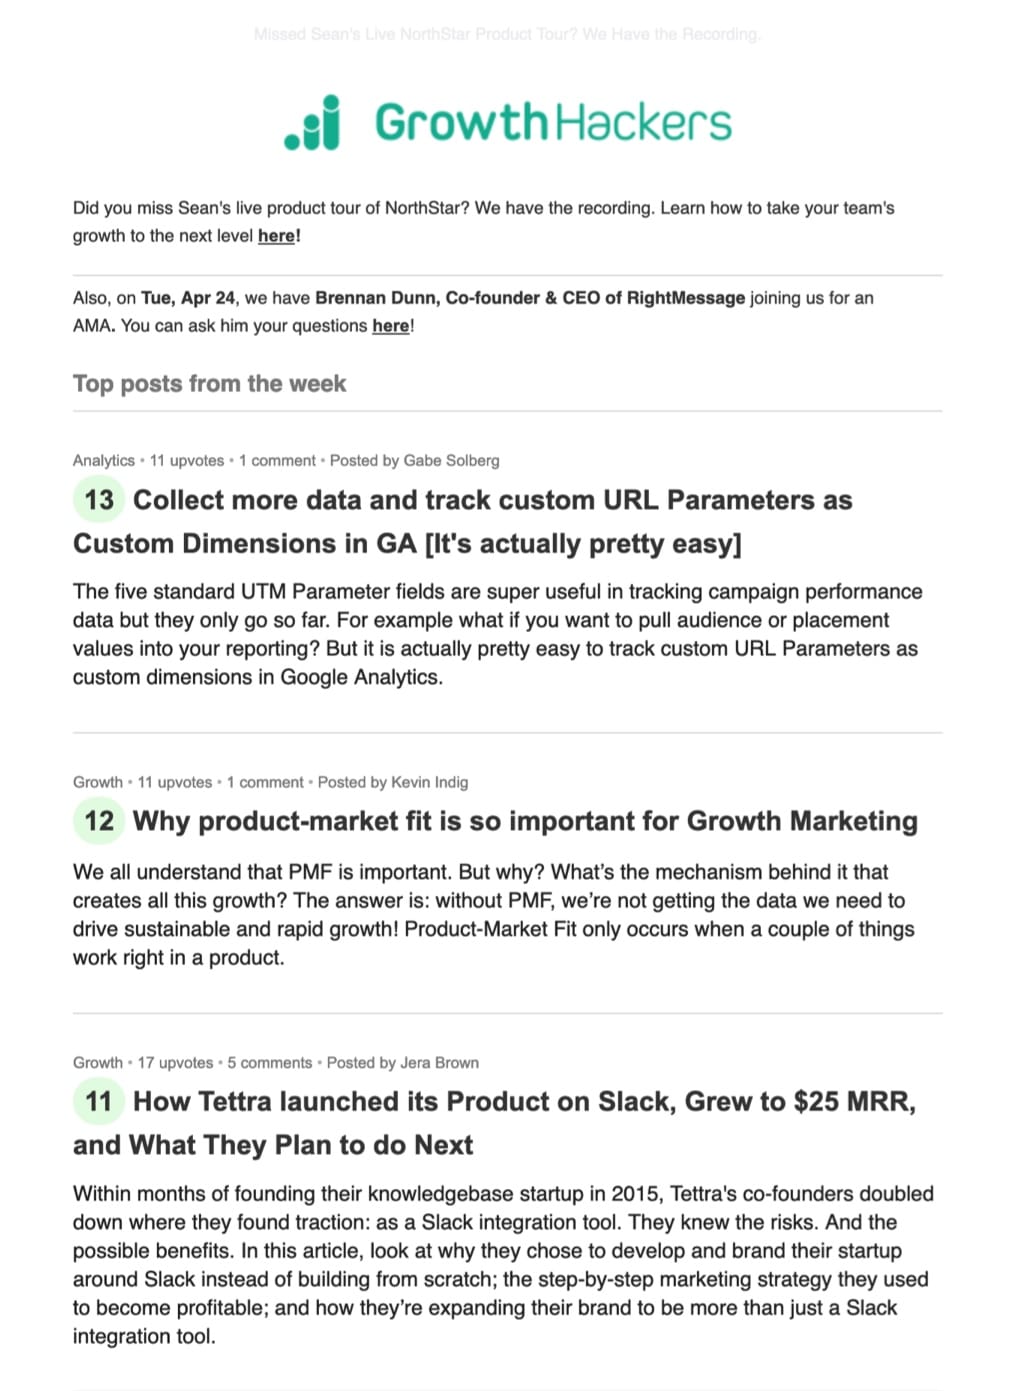 Email marketing best practices Growthhackers